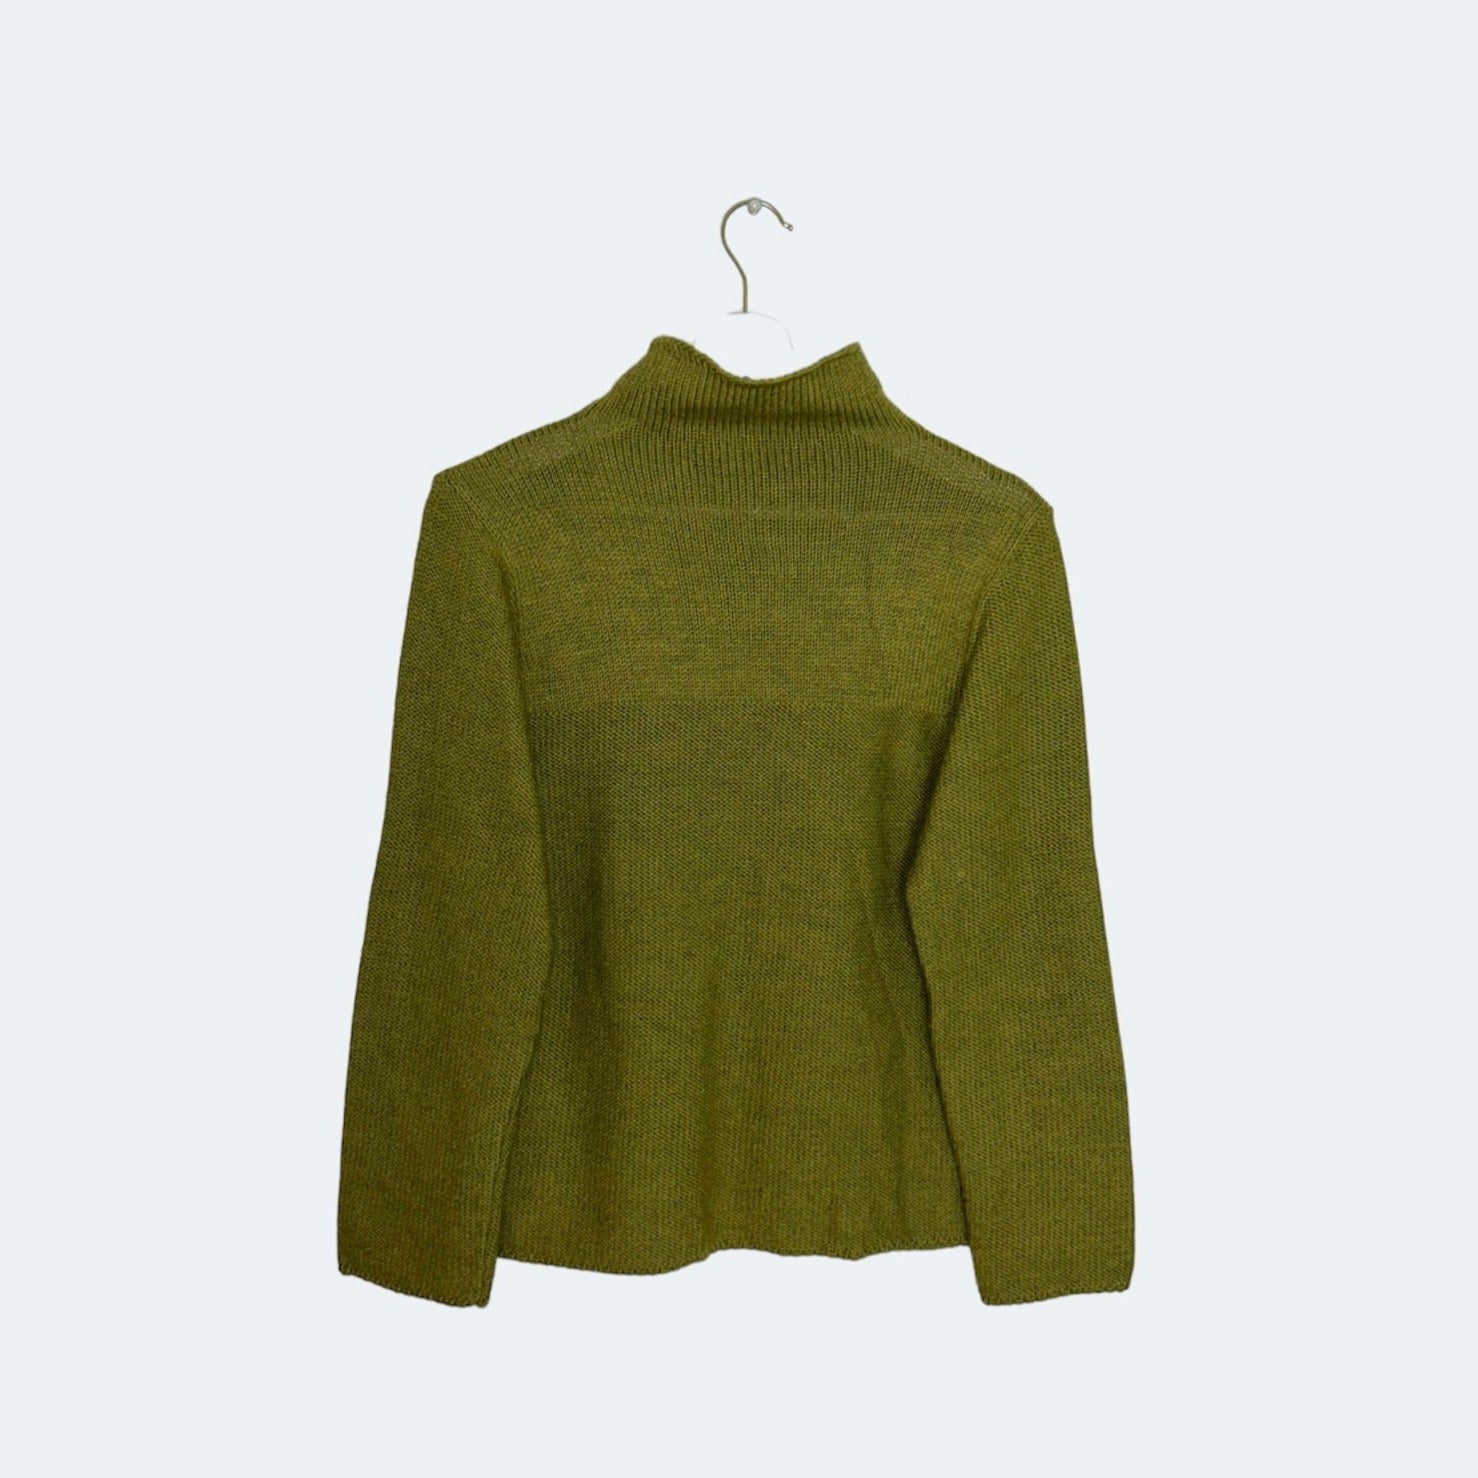 front of green high neck knit jumper shown on a  white background